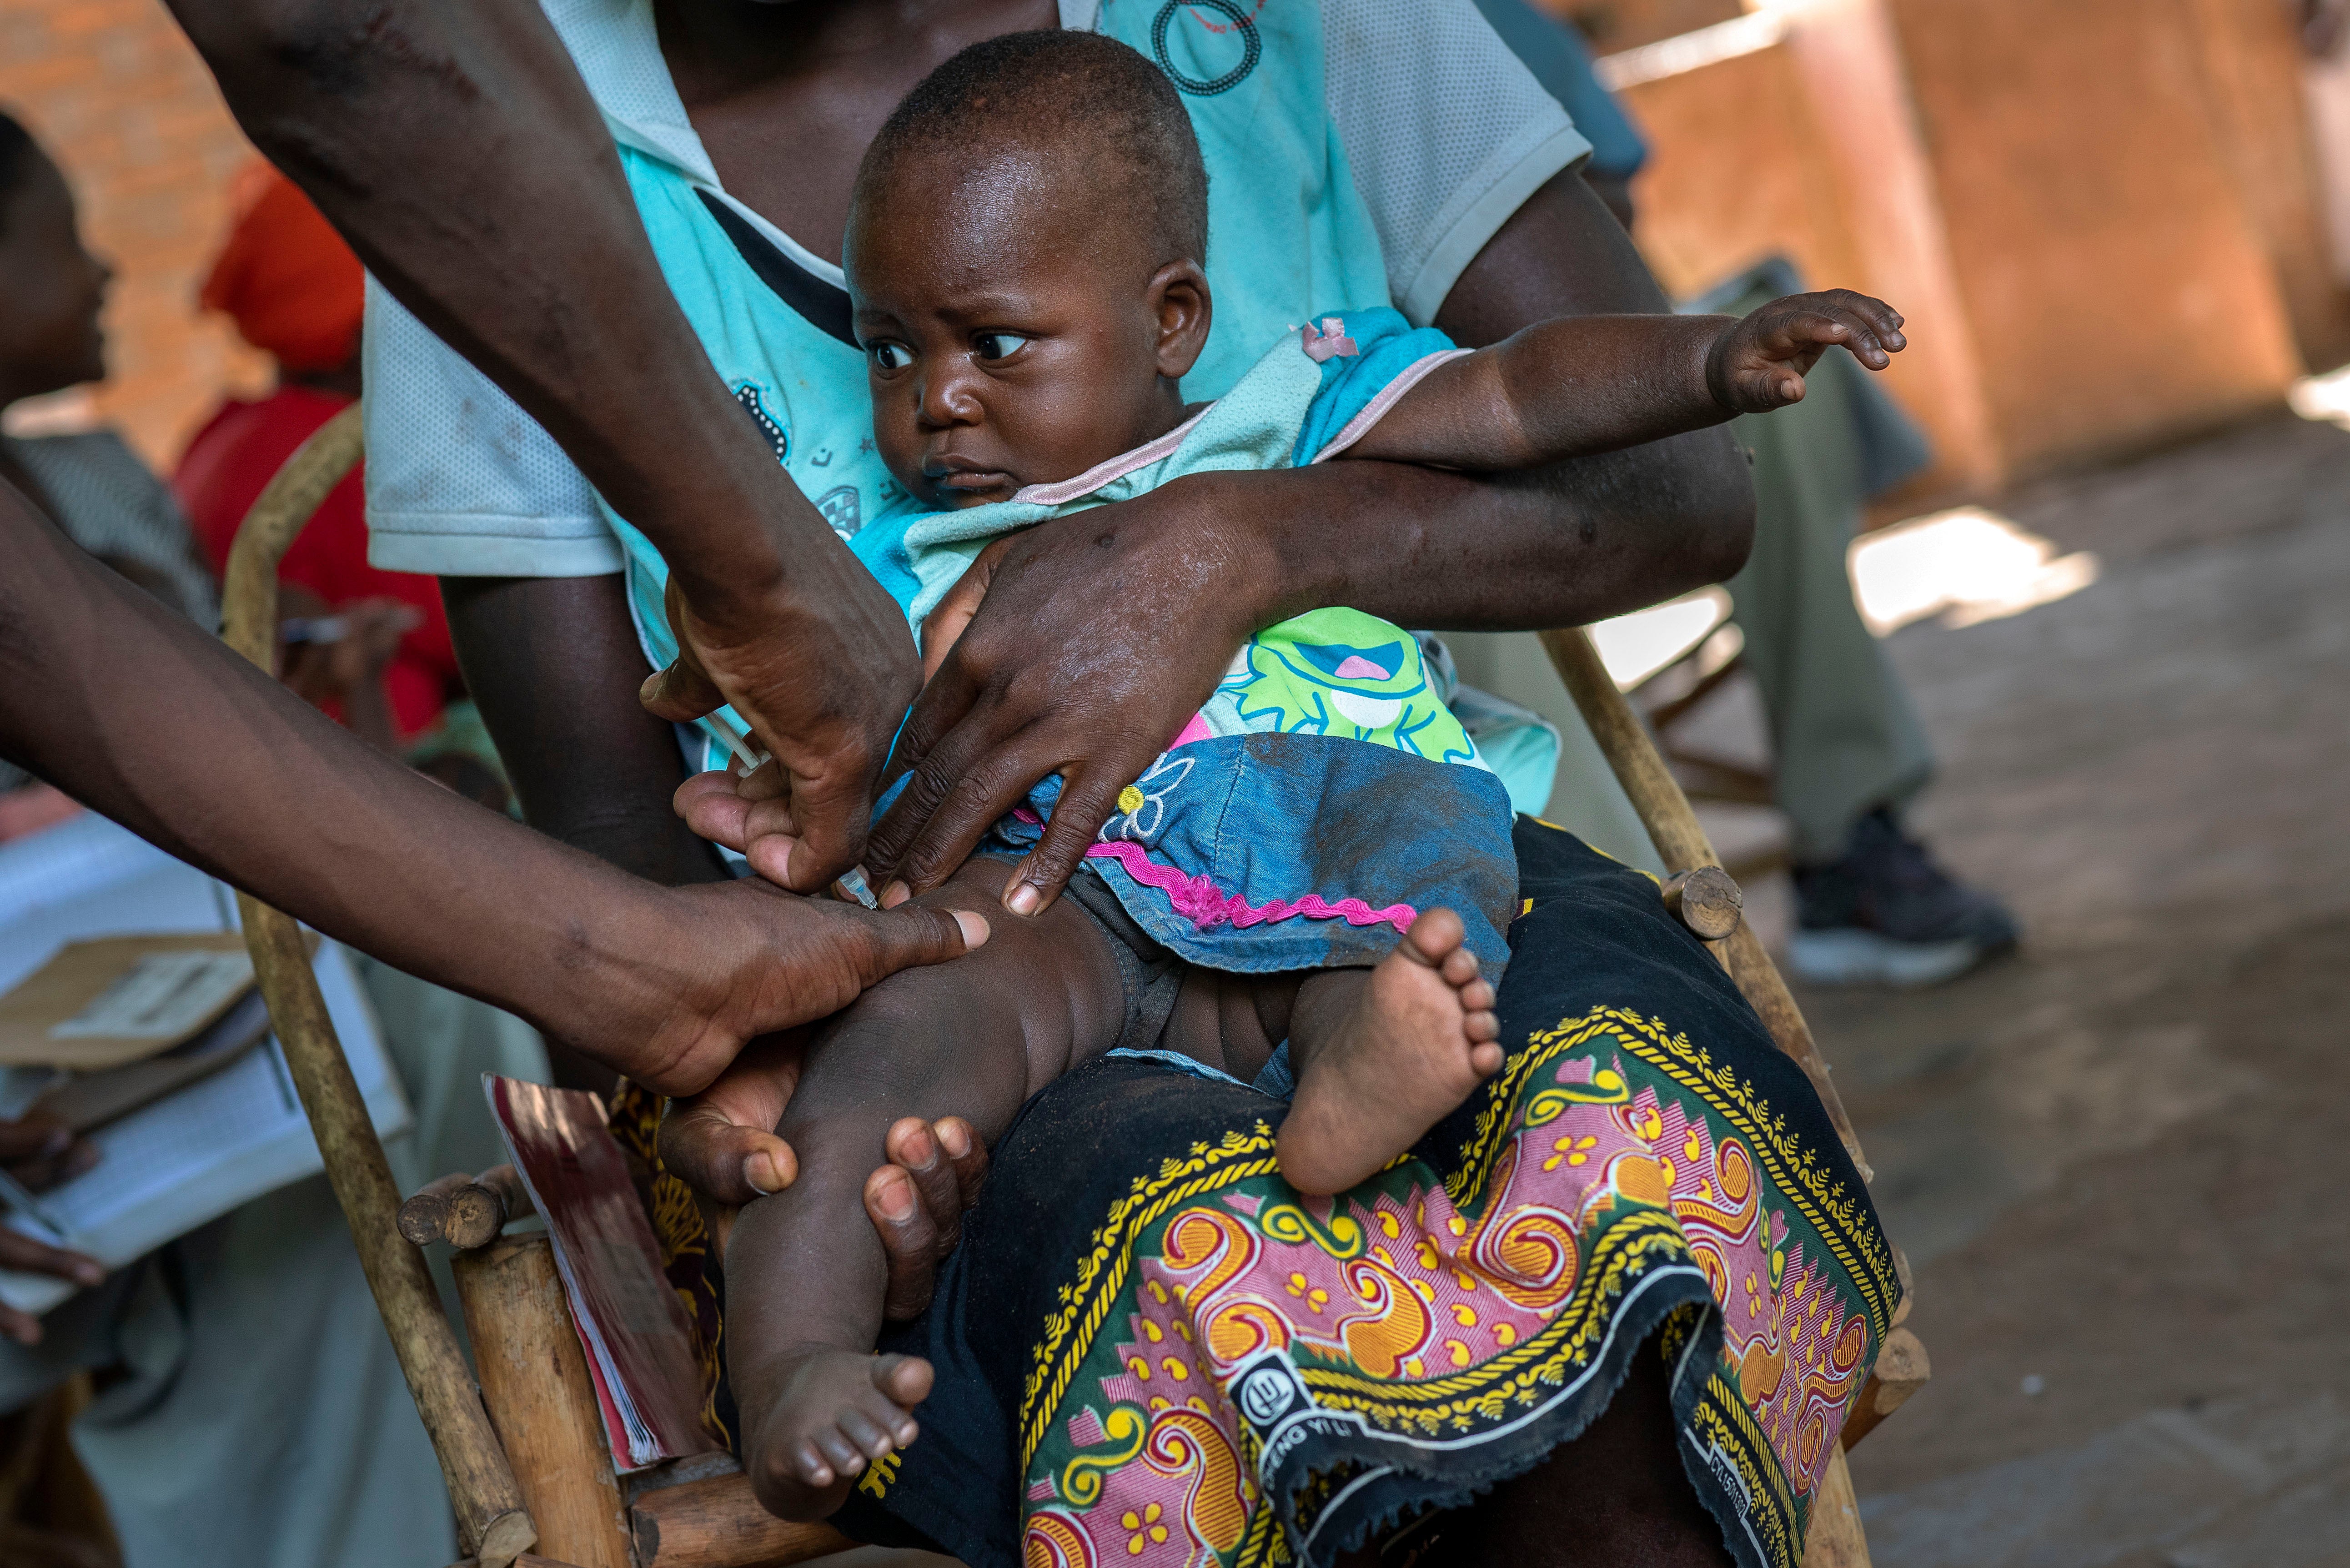 Malaria vaccines, such as this one administered to a baby from the Malawi village of Tomali, can save thousands of lives